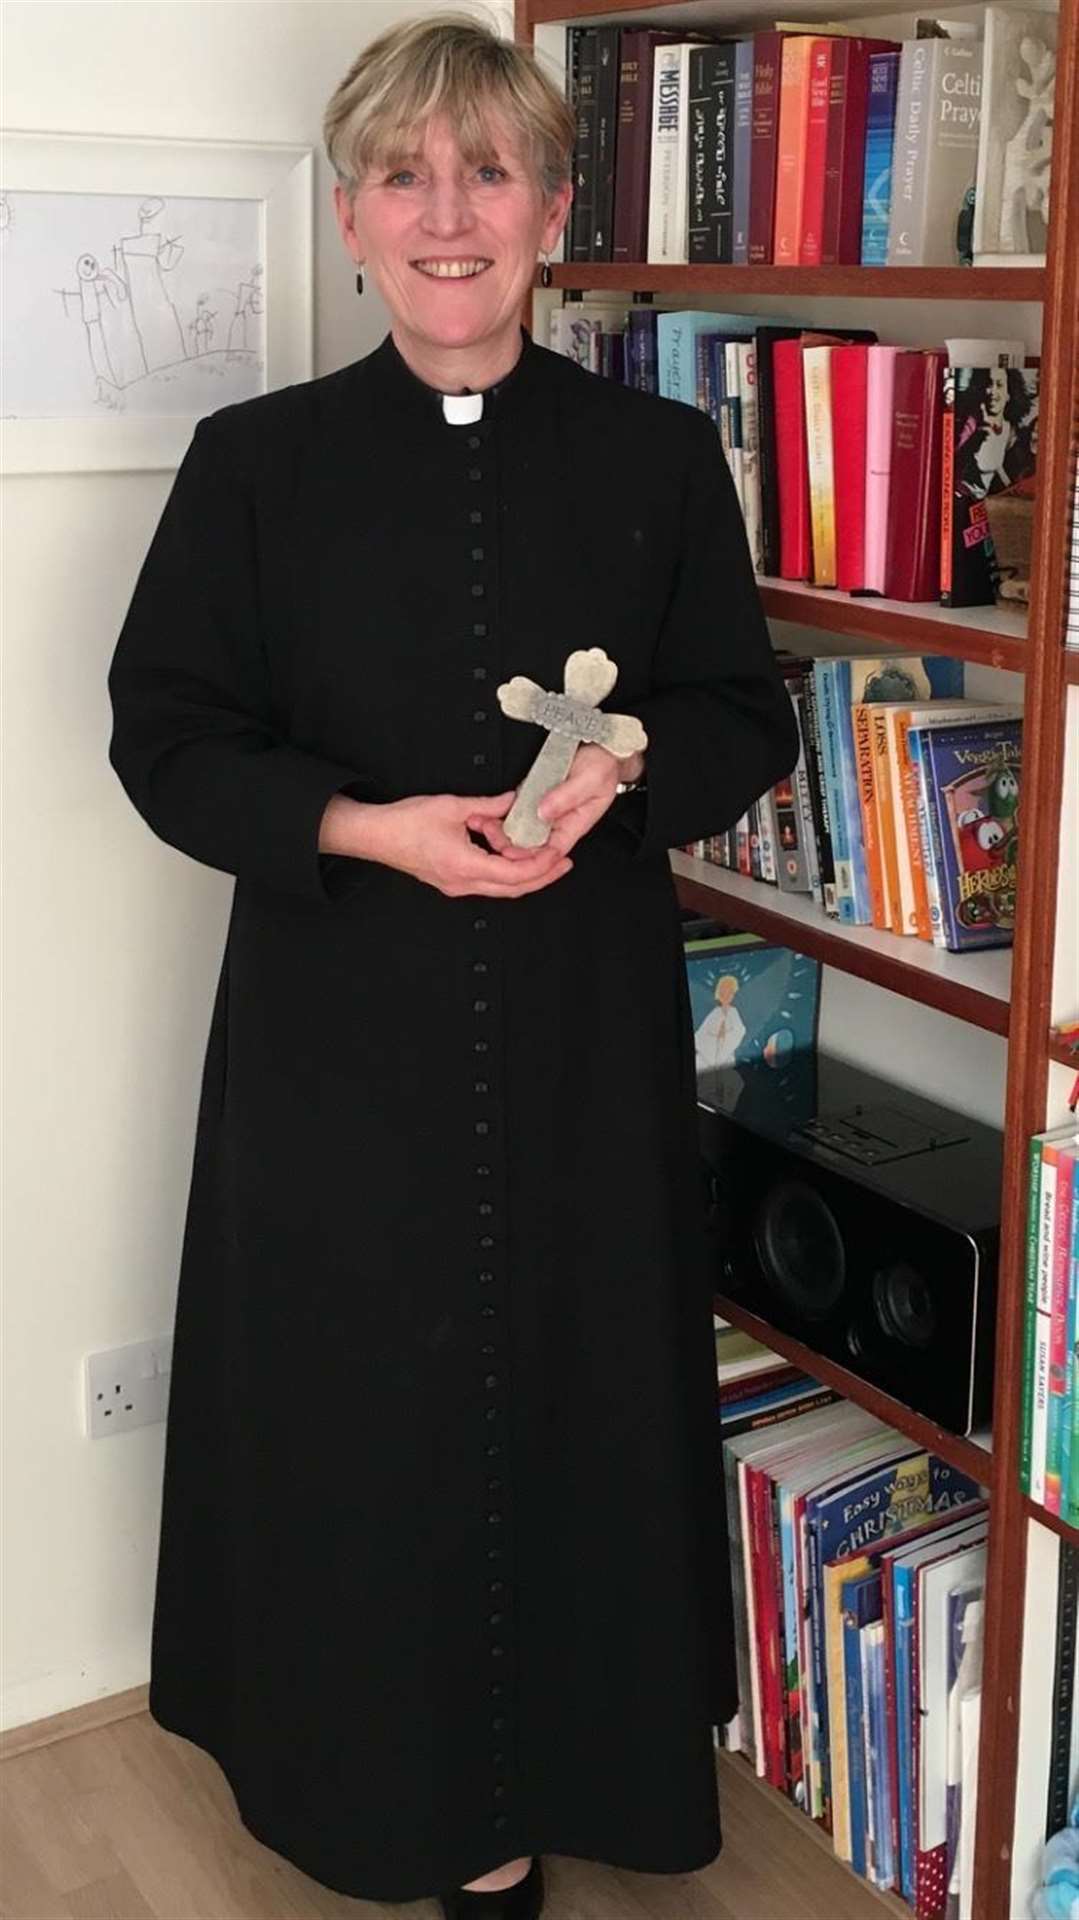 The Reverend Julie Coleman vowed to wear a black cassock daily until the first anniversary of the Manchester bombing